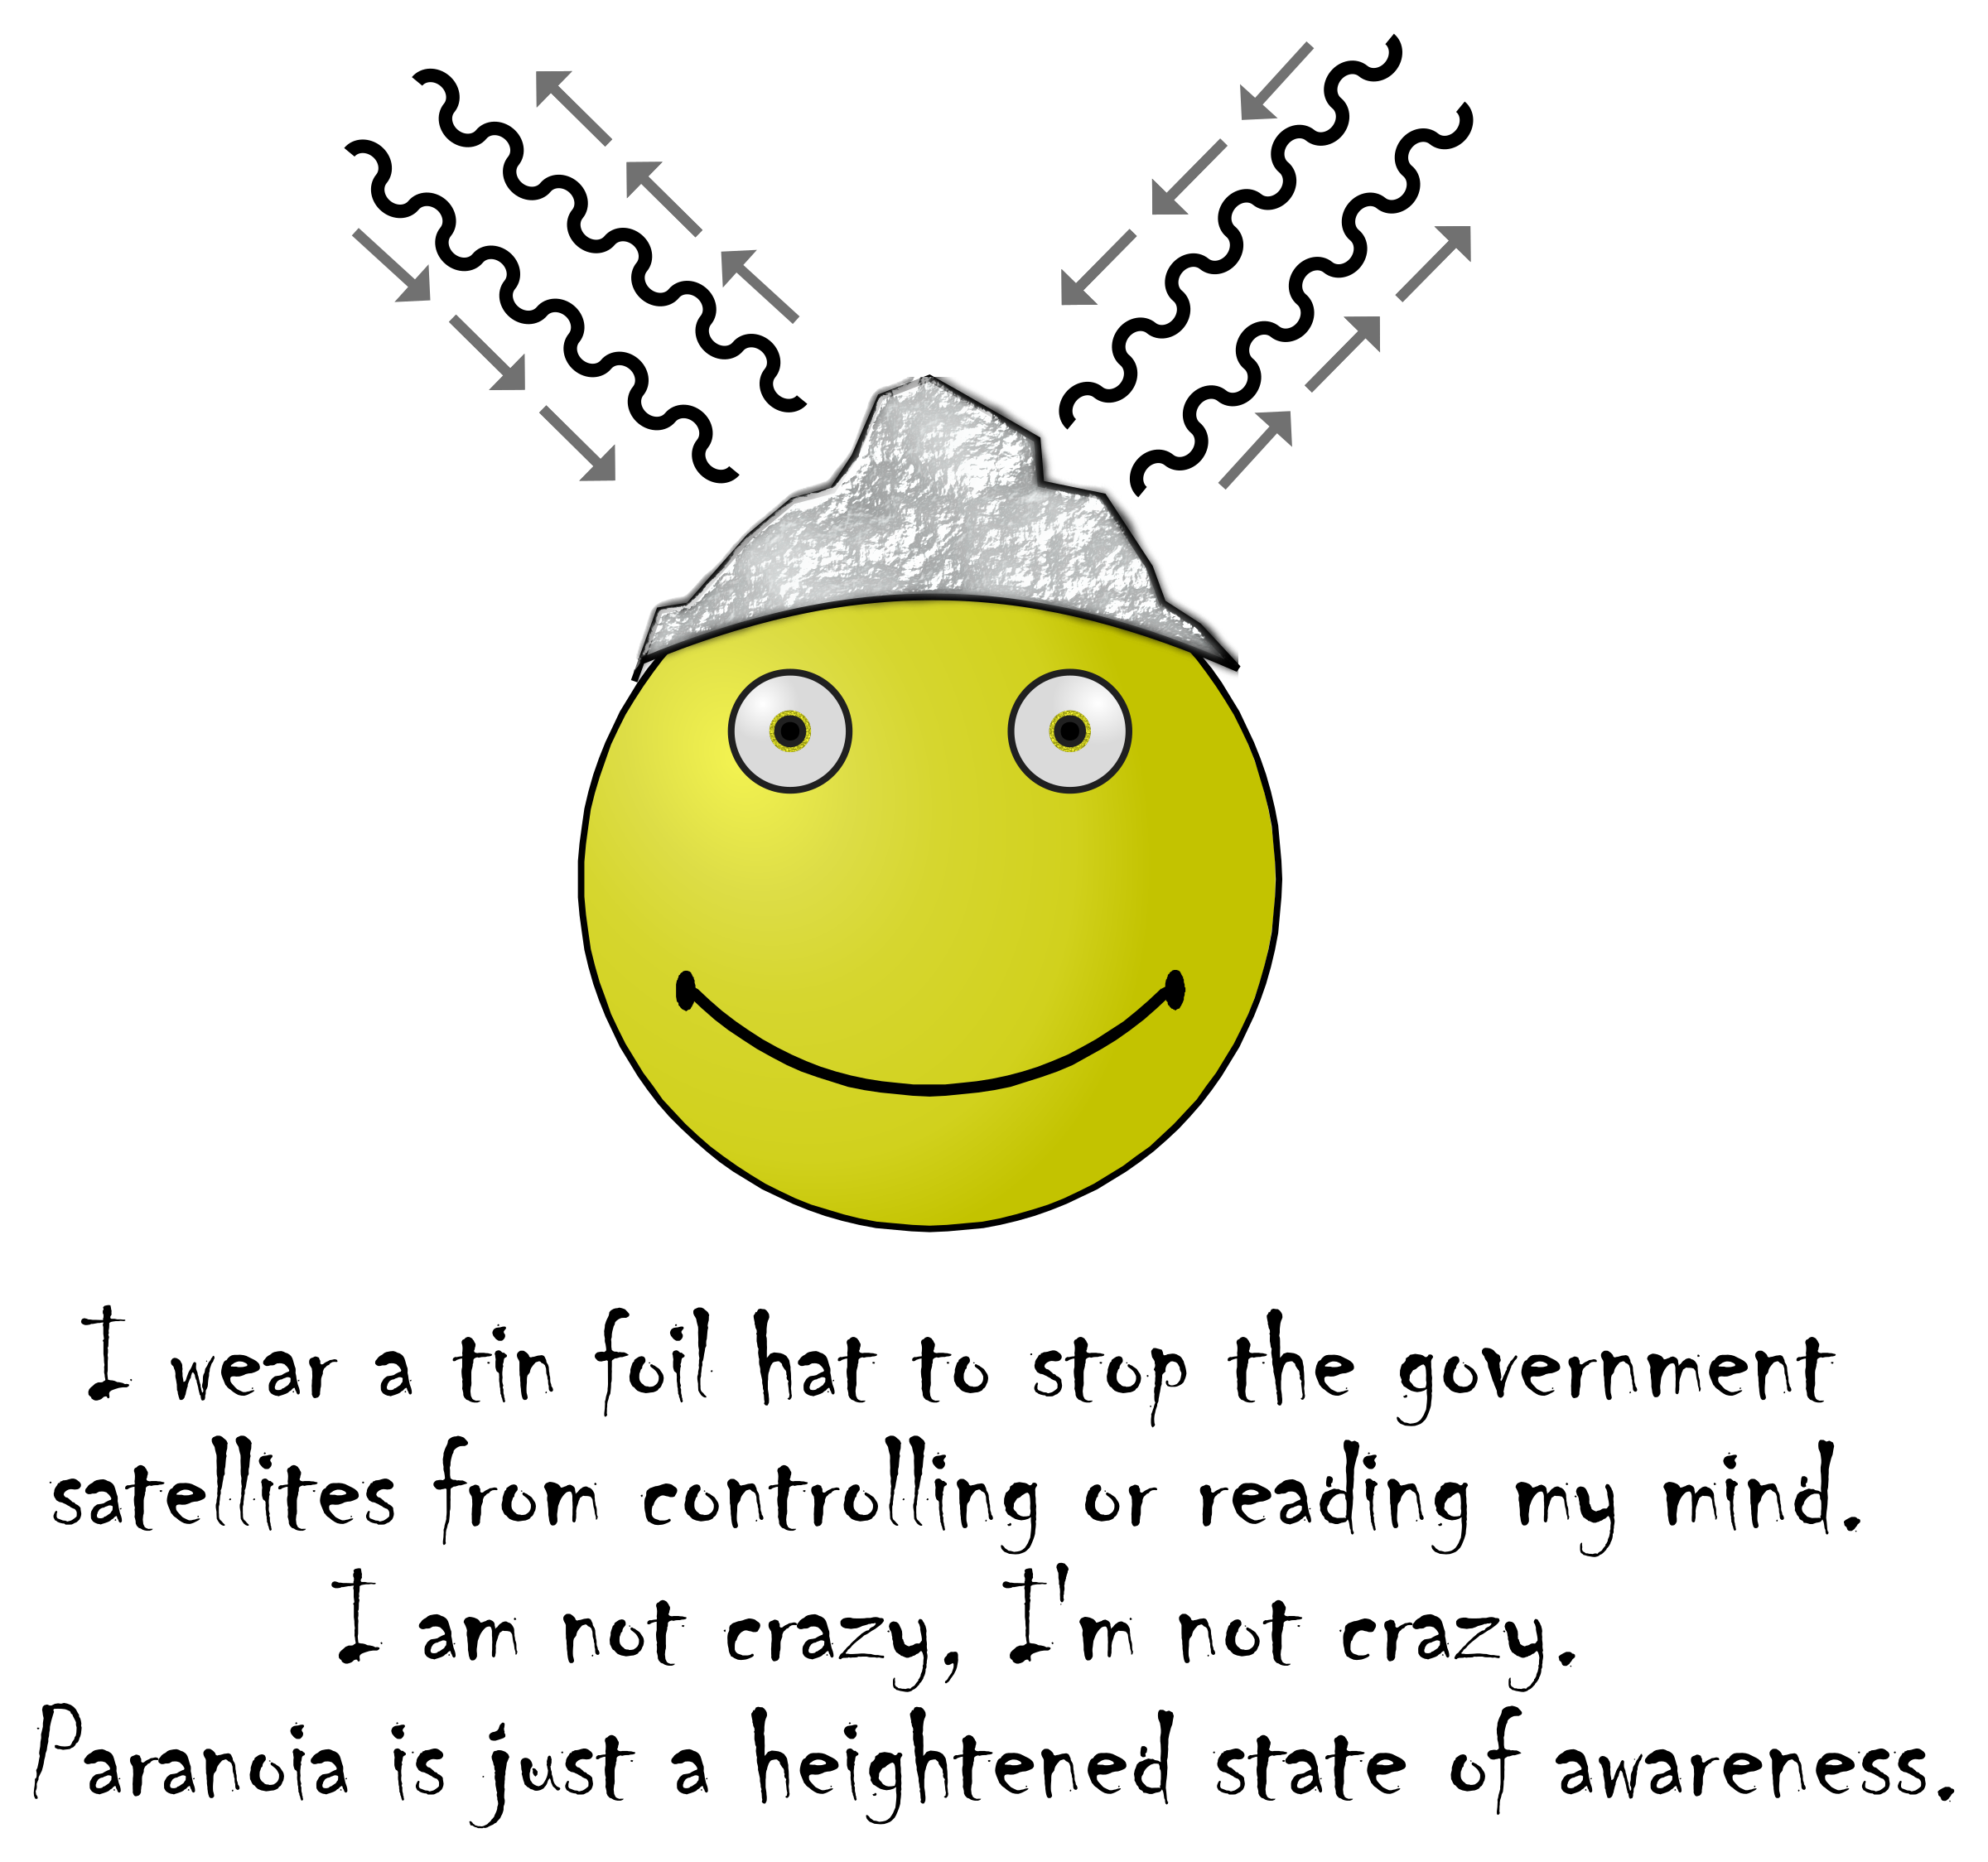 Tin foil big image. Smiley clipart reading